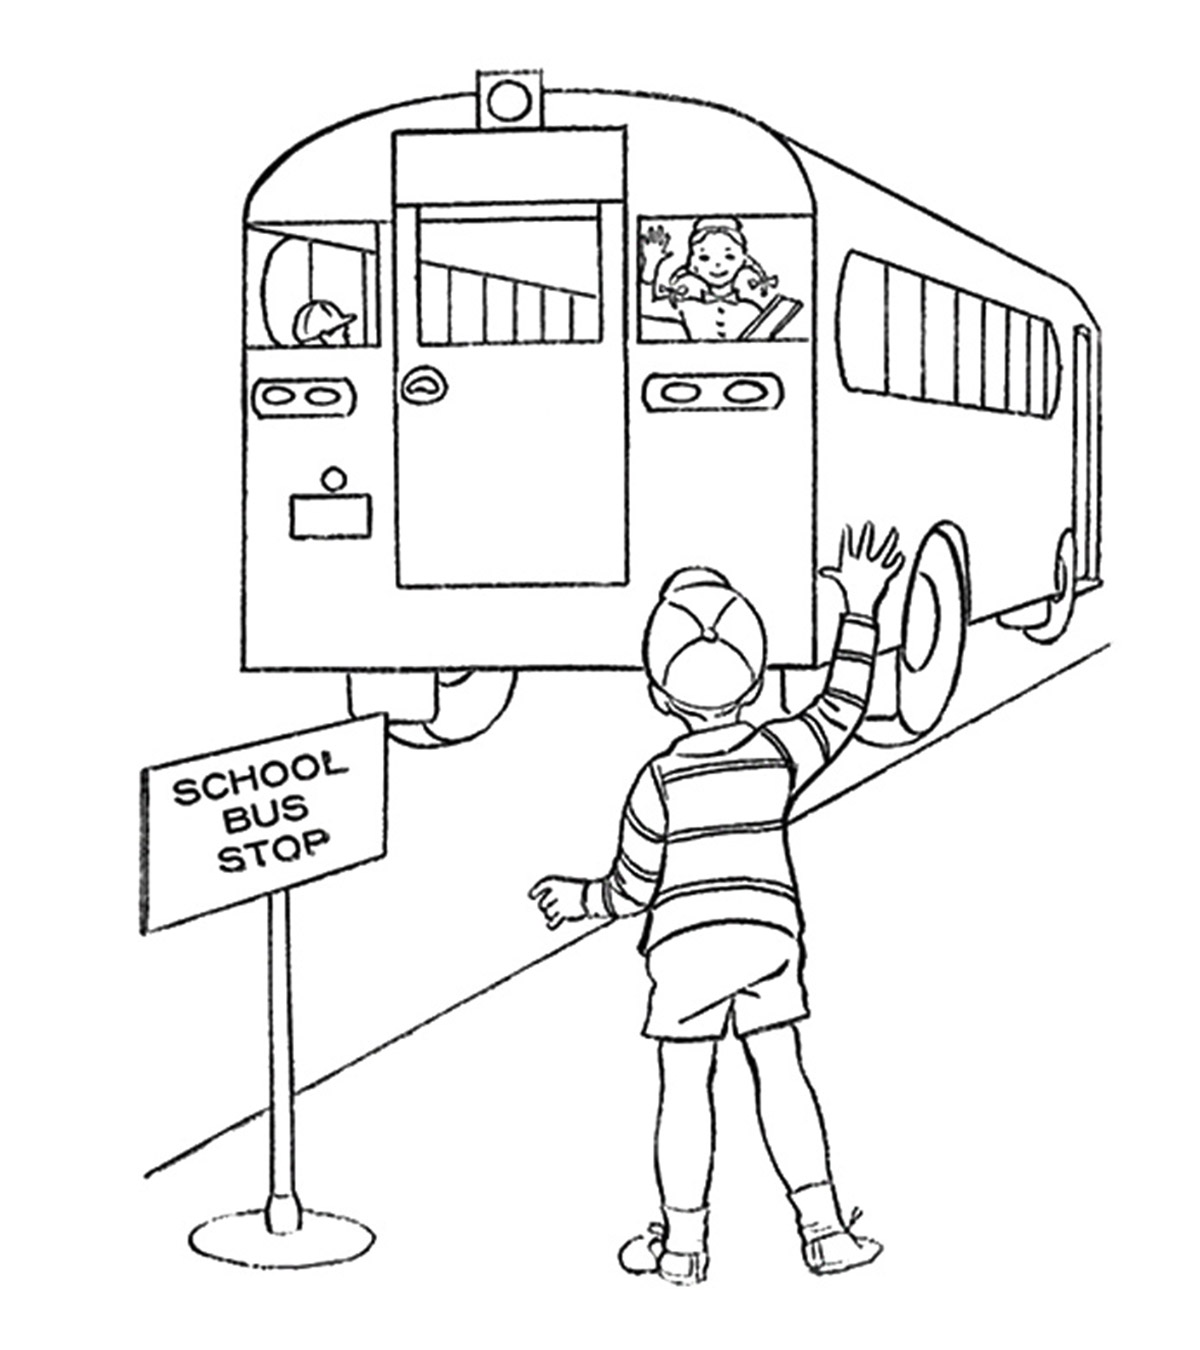 Top 10 School Bus Coloring Pages For Your Little Ones_image